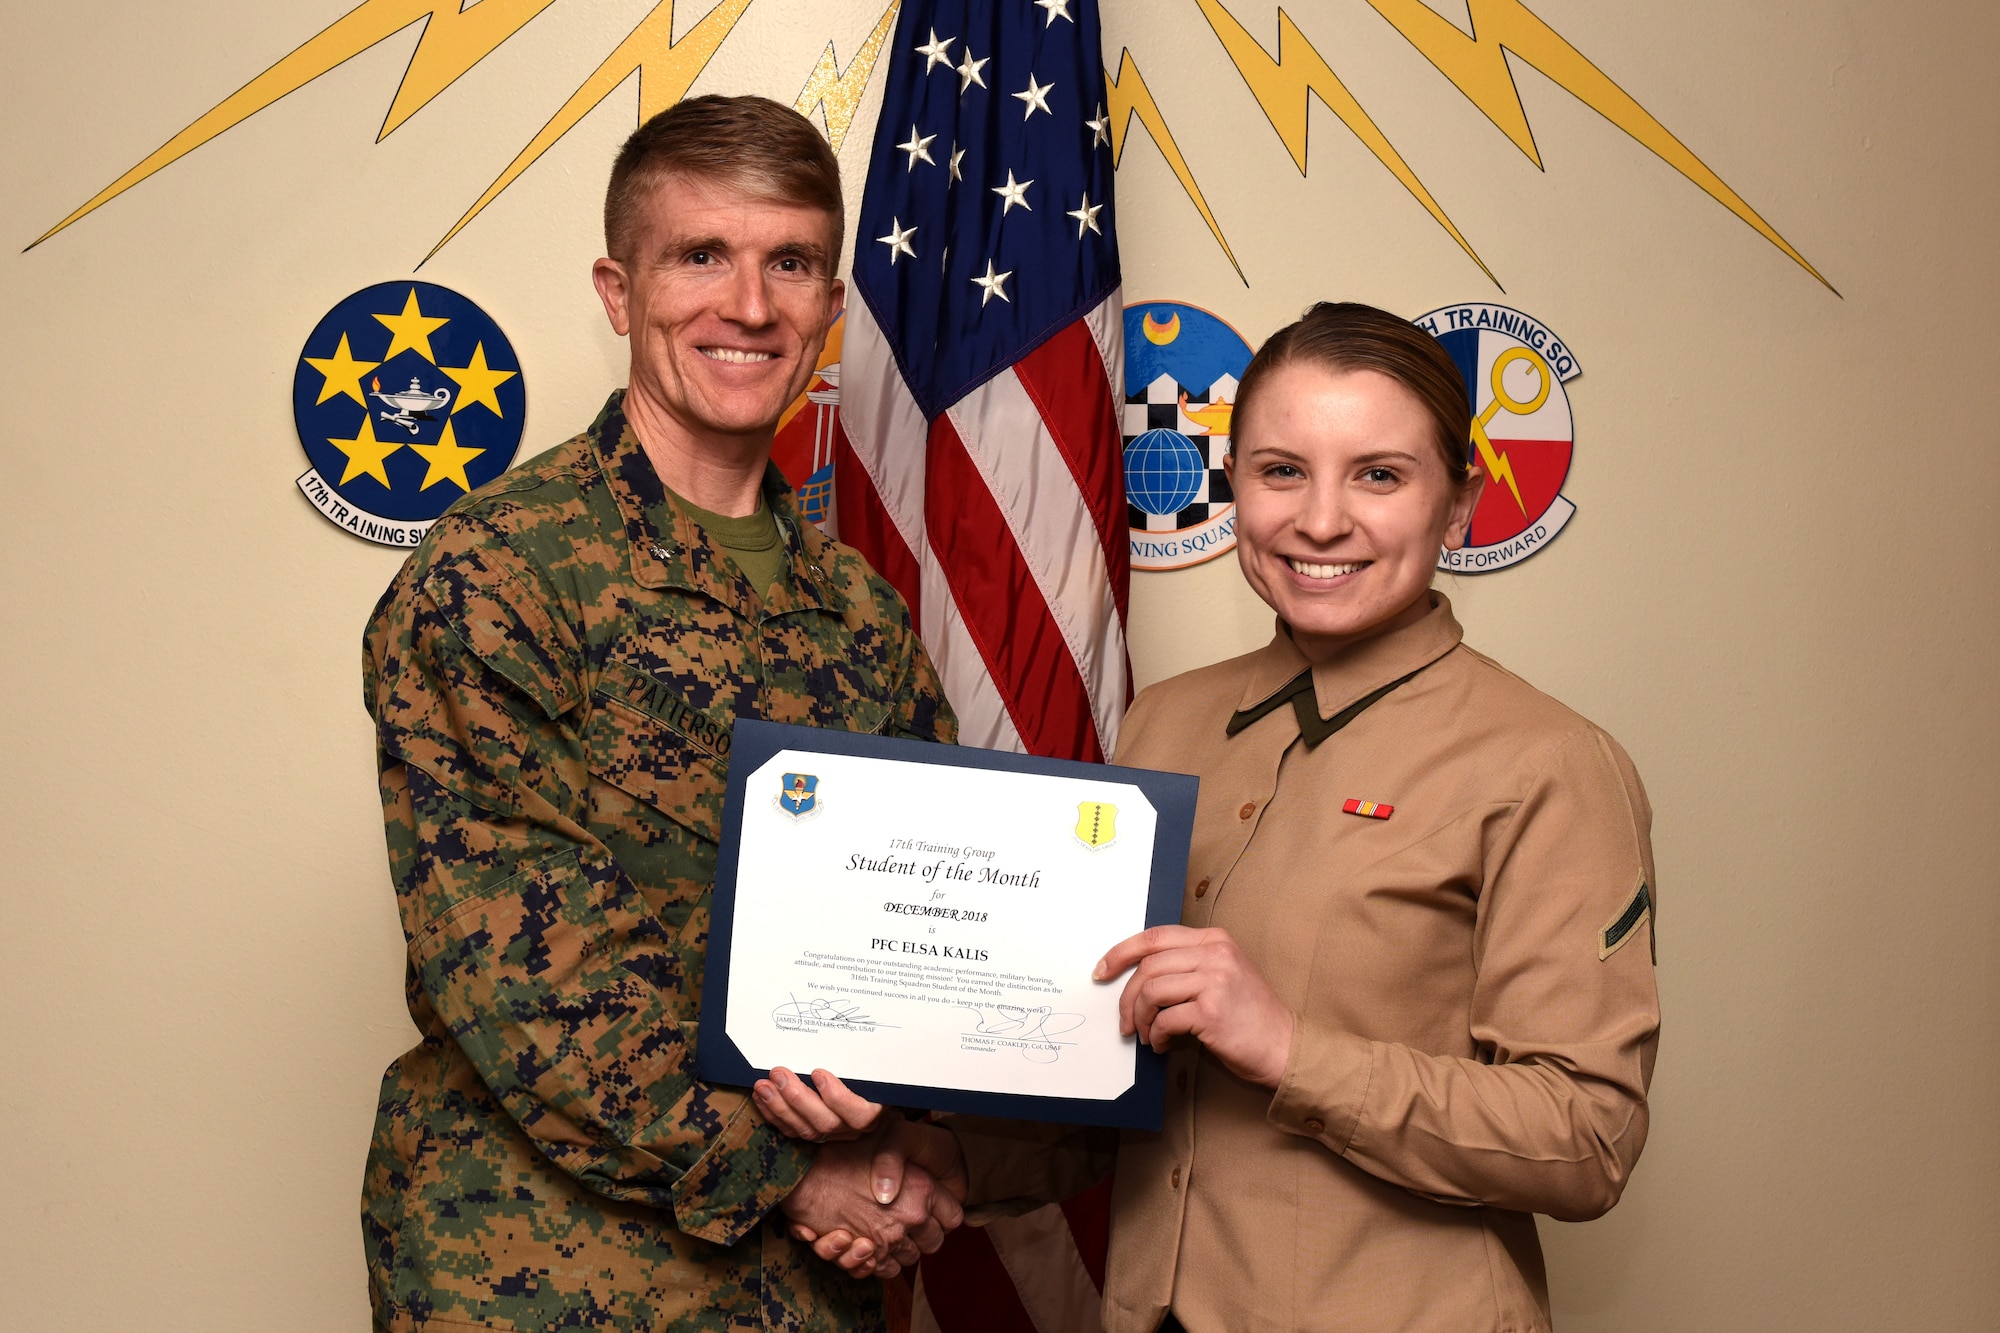 U.S. Marine Corps. Lt. Col. Earl Patterson, Marine Corps. Detachment at Goodfellow commanding officer, presents the 316th Training Squadron Student of the Month award to Pfc. Elsa Kalis, 316th TRS student, at the Brandenburg Hall on Goodfellow Air Force Base, Texas, Jan. 4, 2019. The 316th TRS’s mission is to conduct U.S. Air Force, U.S. Army, U.S. Marine Corps, U.S. Navy and U.S. Coast Guard cryptologic, human intelligence and military training. (U.S. Air Force photo by Airman 1st Class Zachary Chapman/Released)